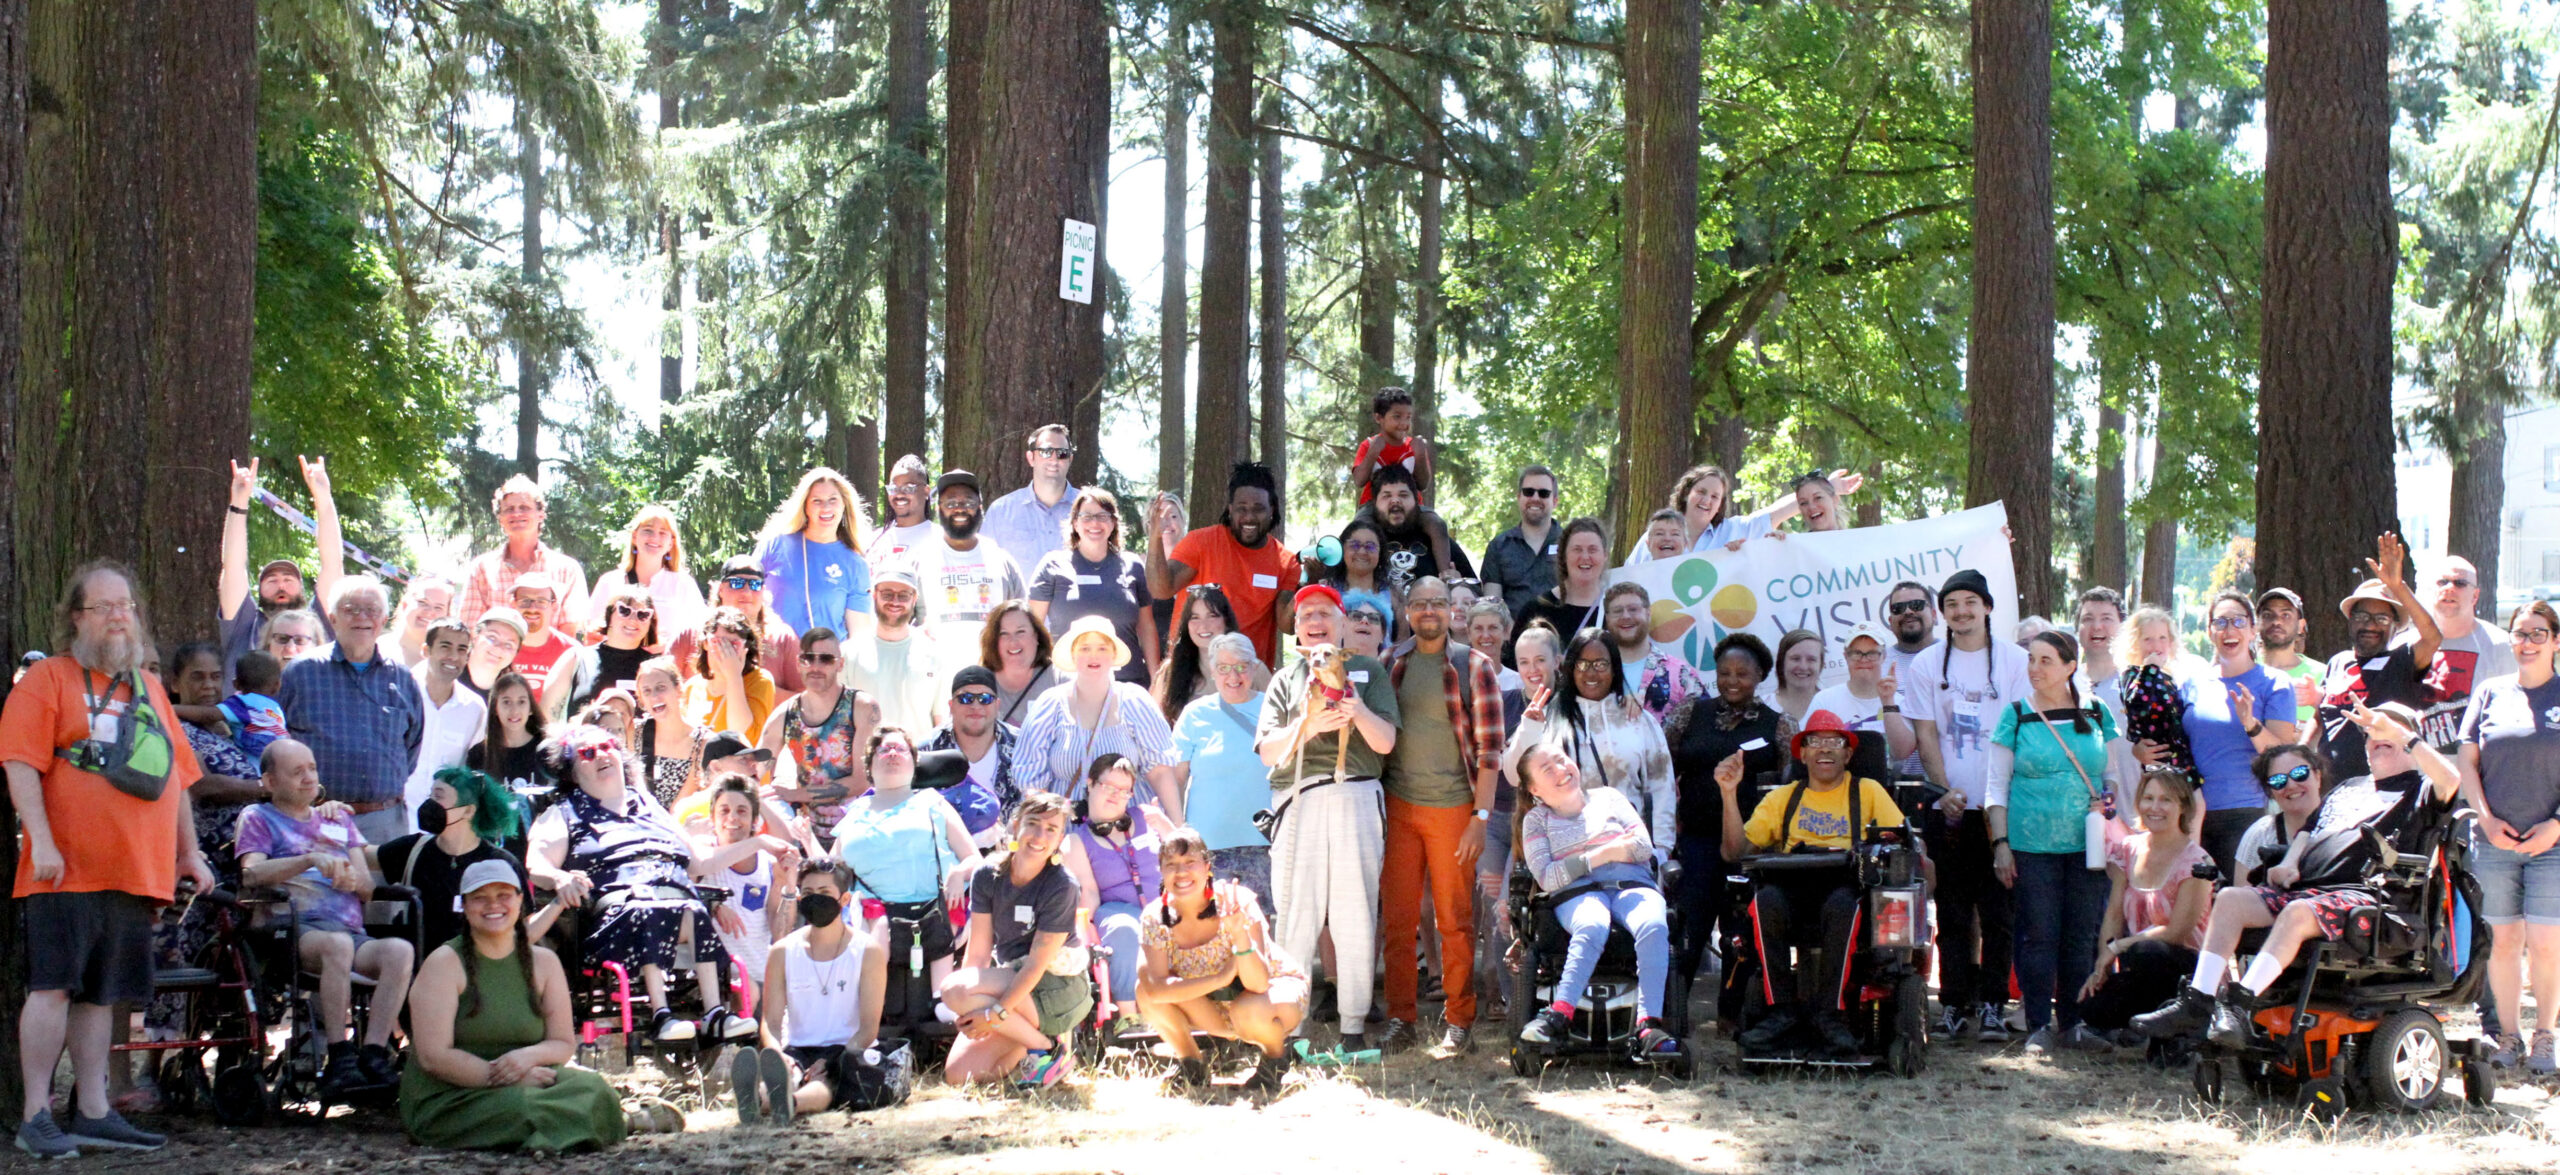 A large diverse group of people gathered on a summer afternoon under the shade of tall Douglas Fir trees